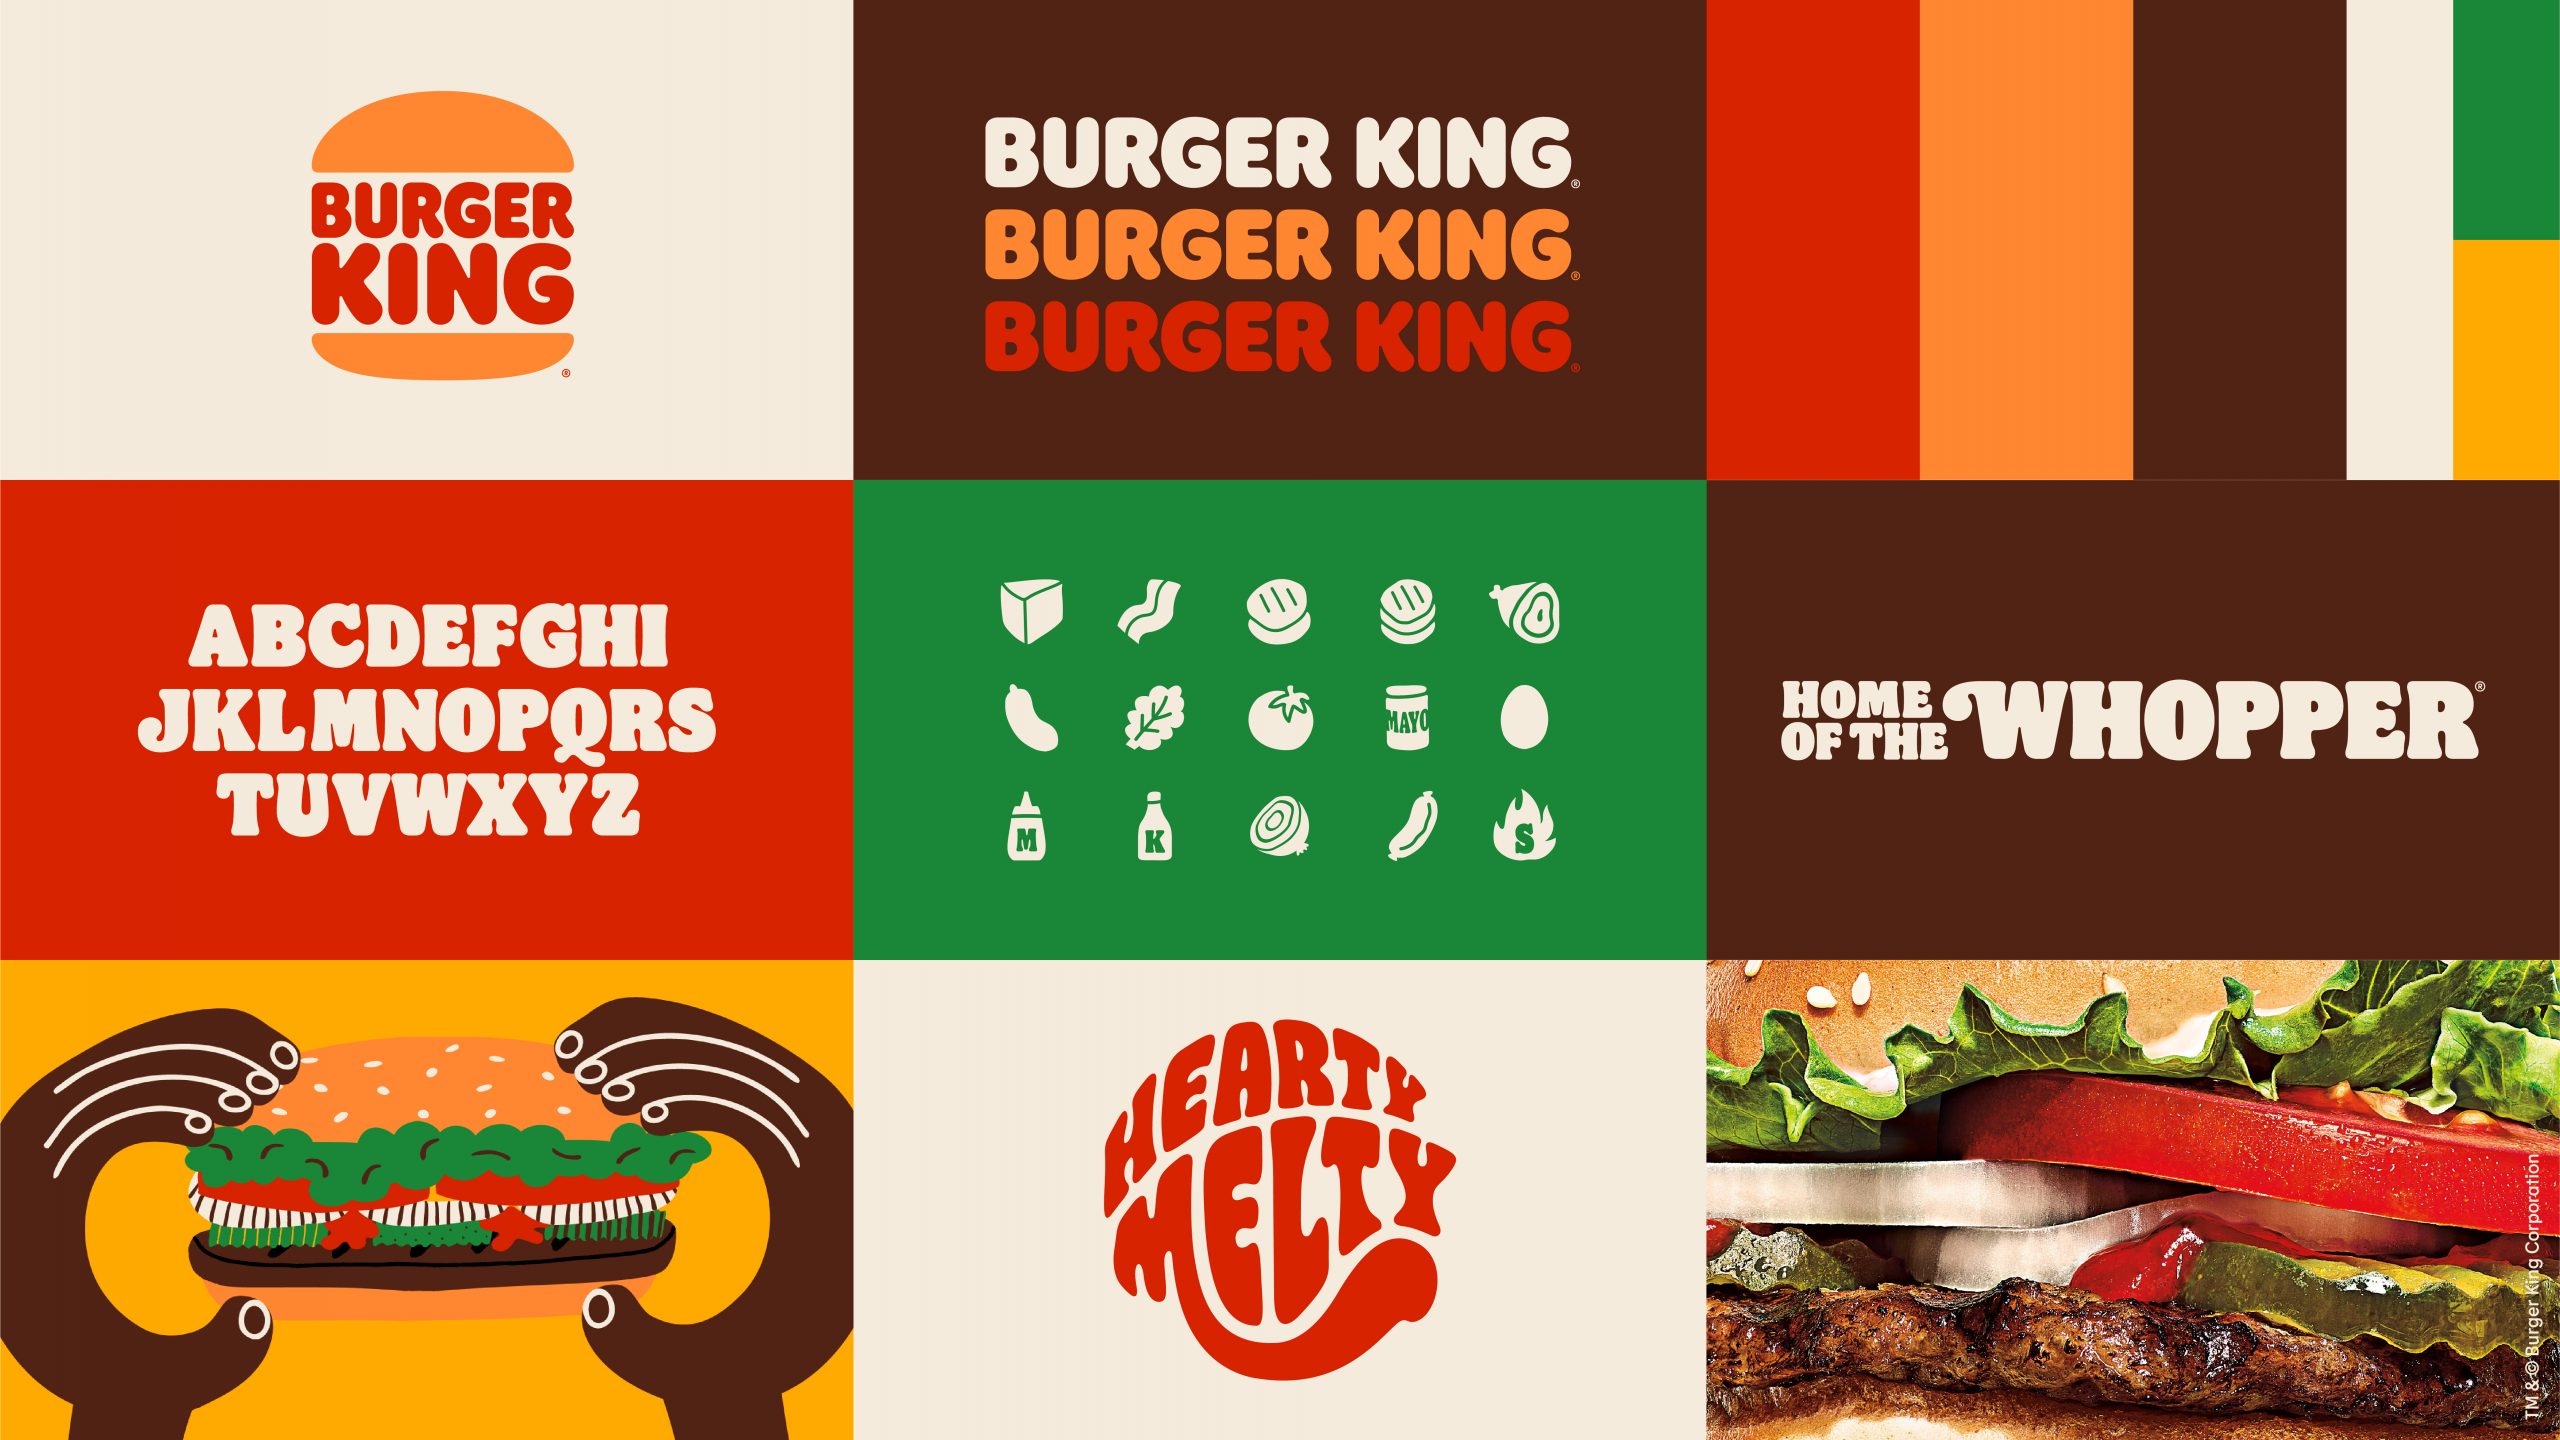 Is Brand Enough for Burger King?